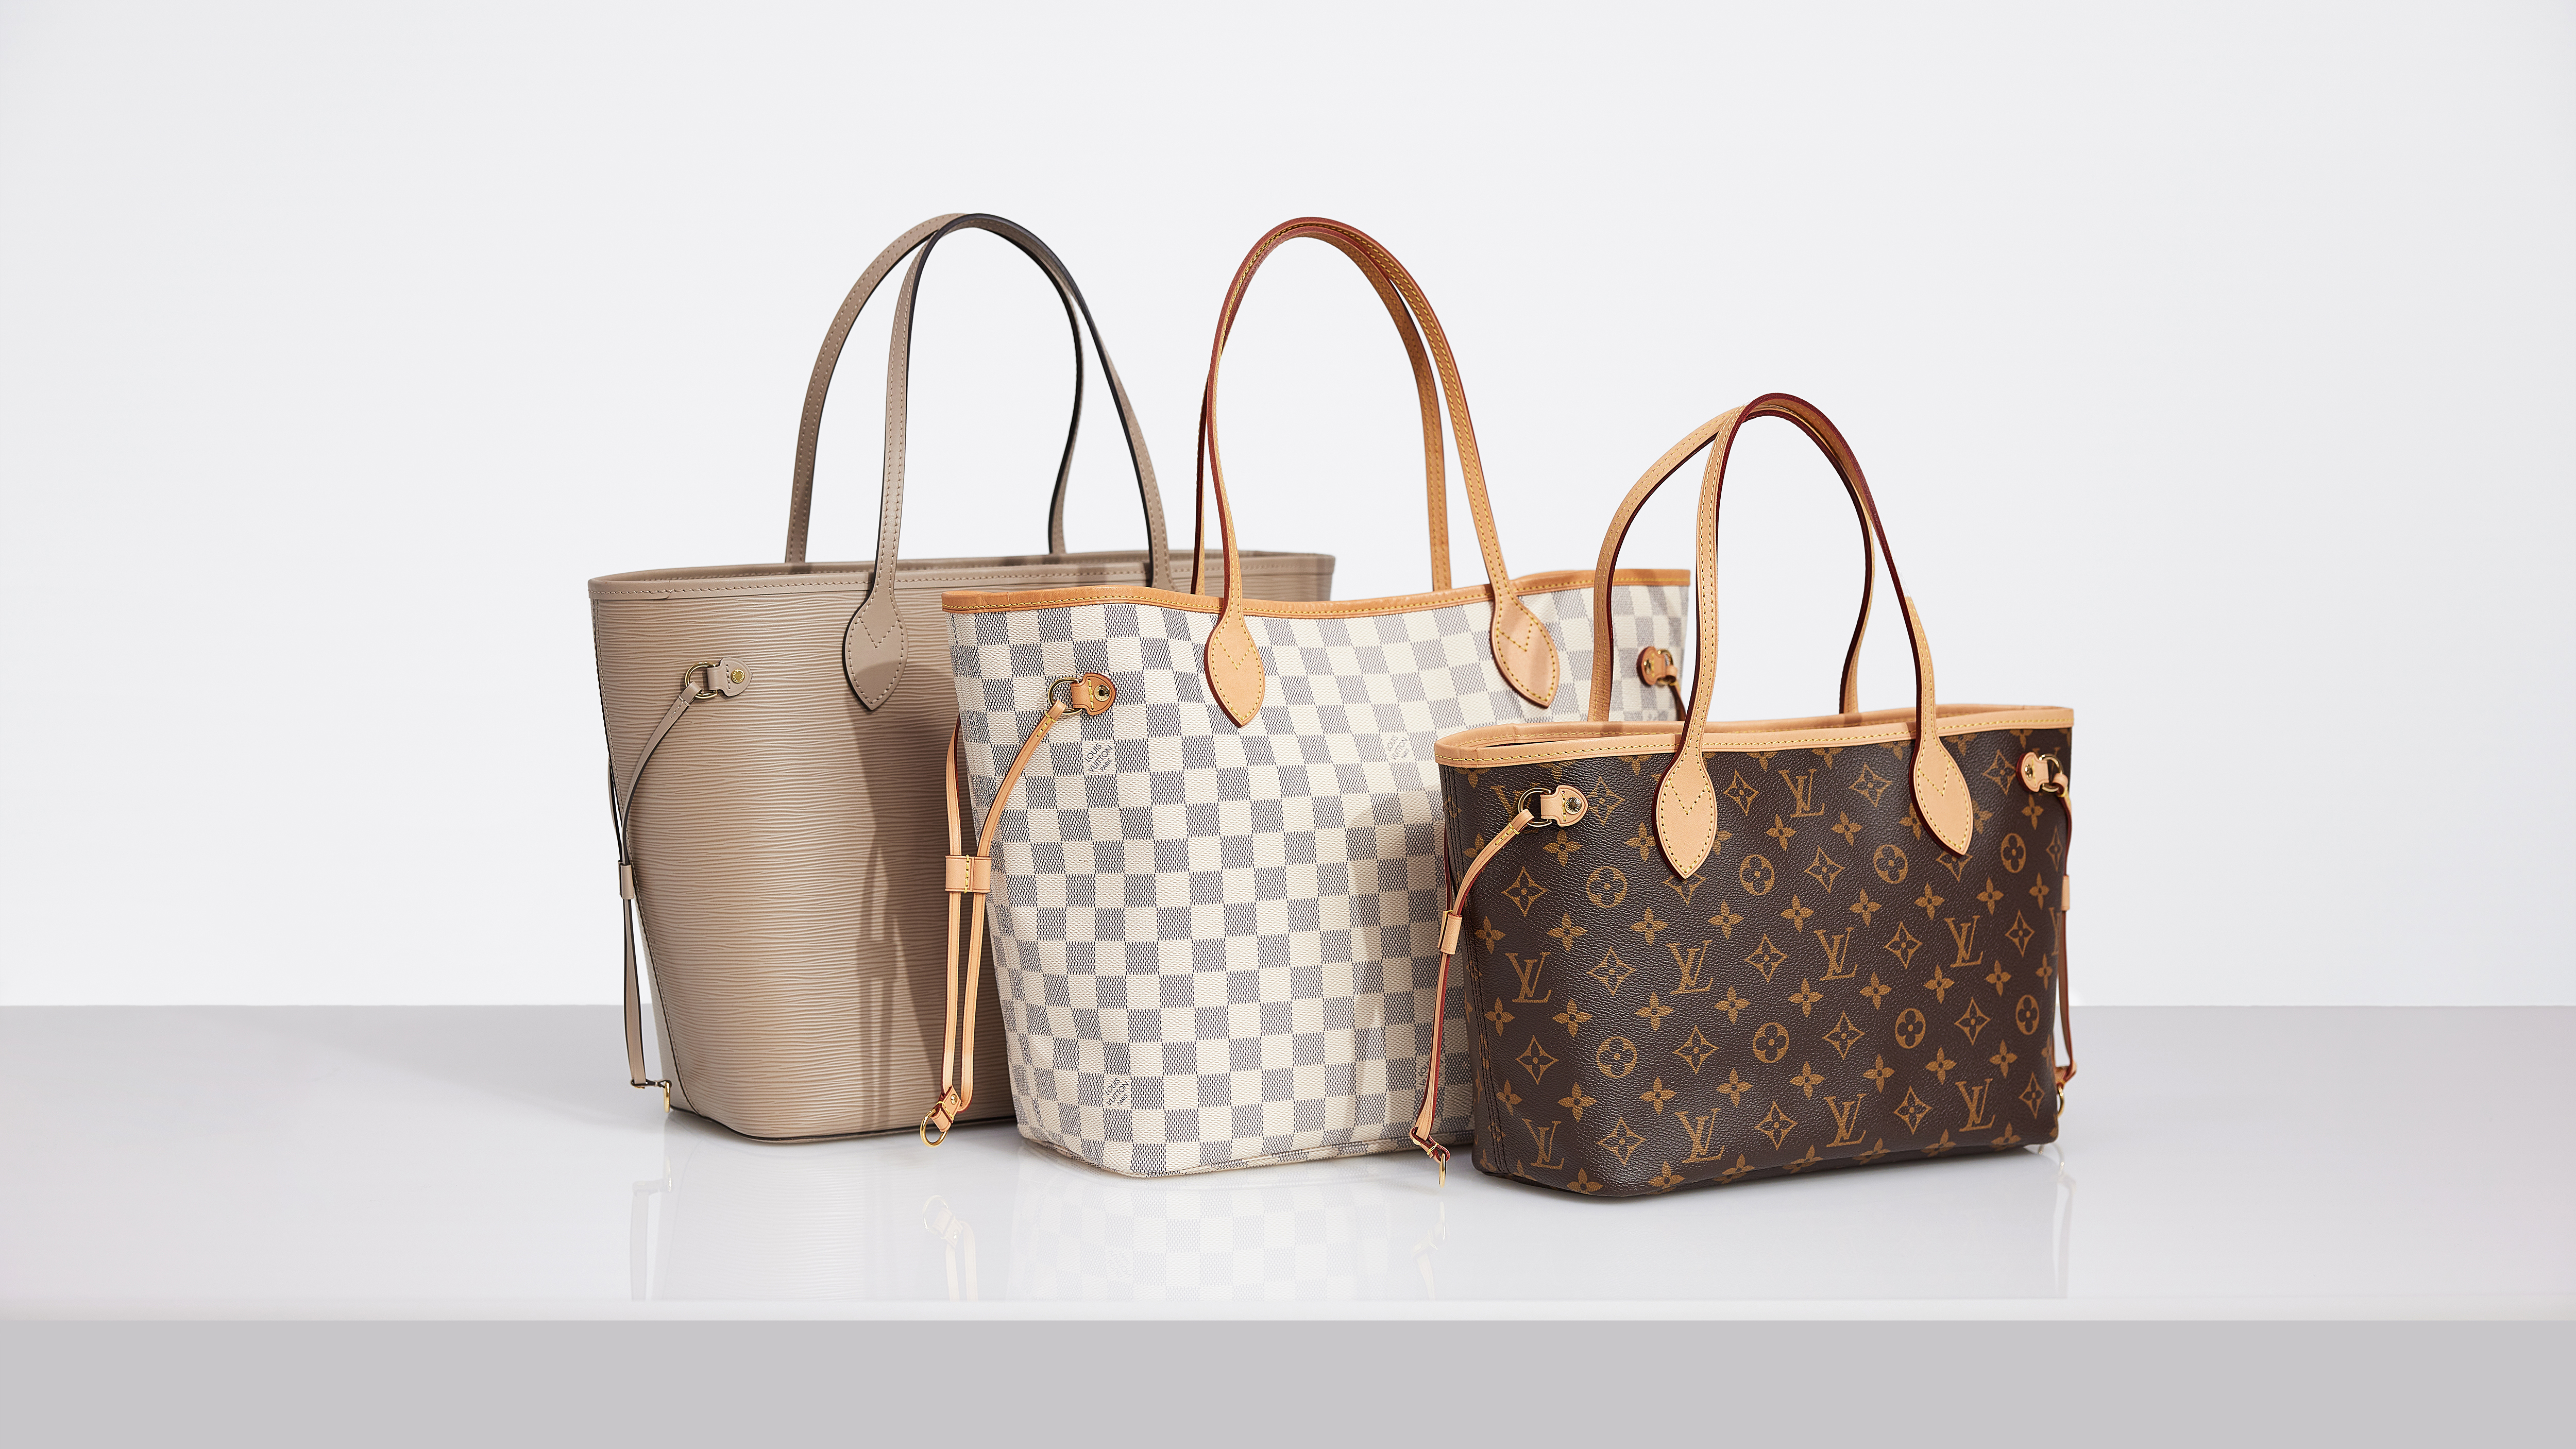 What is the starting price of Louis Vuitton bags in India? - Quora